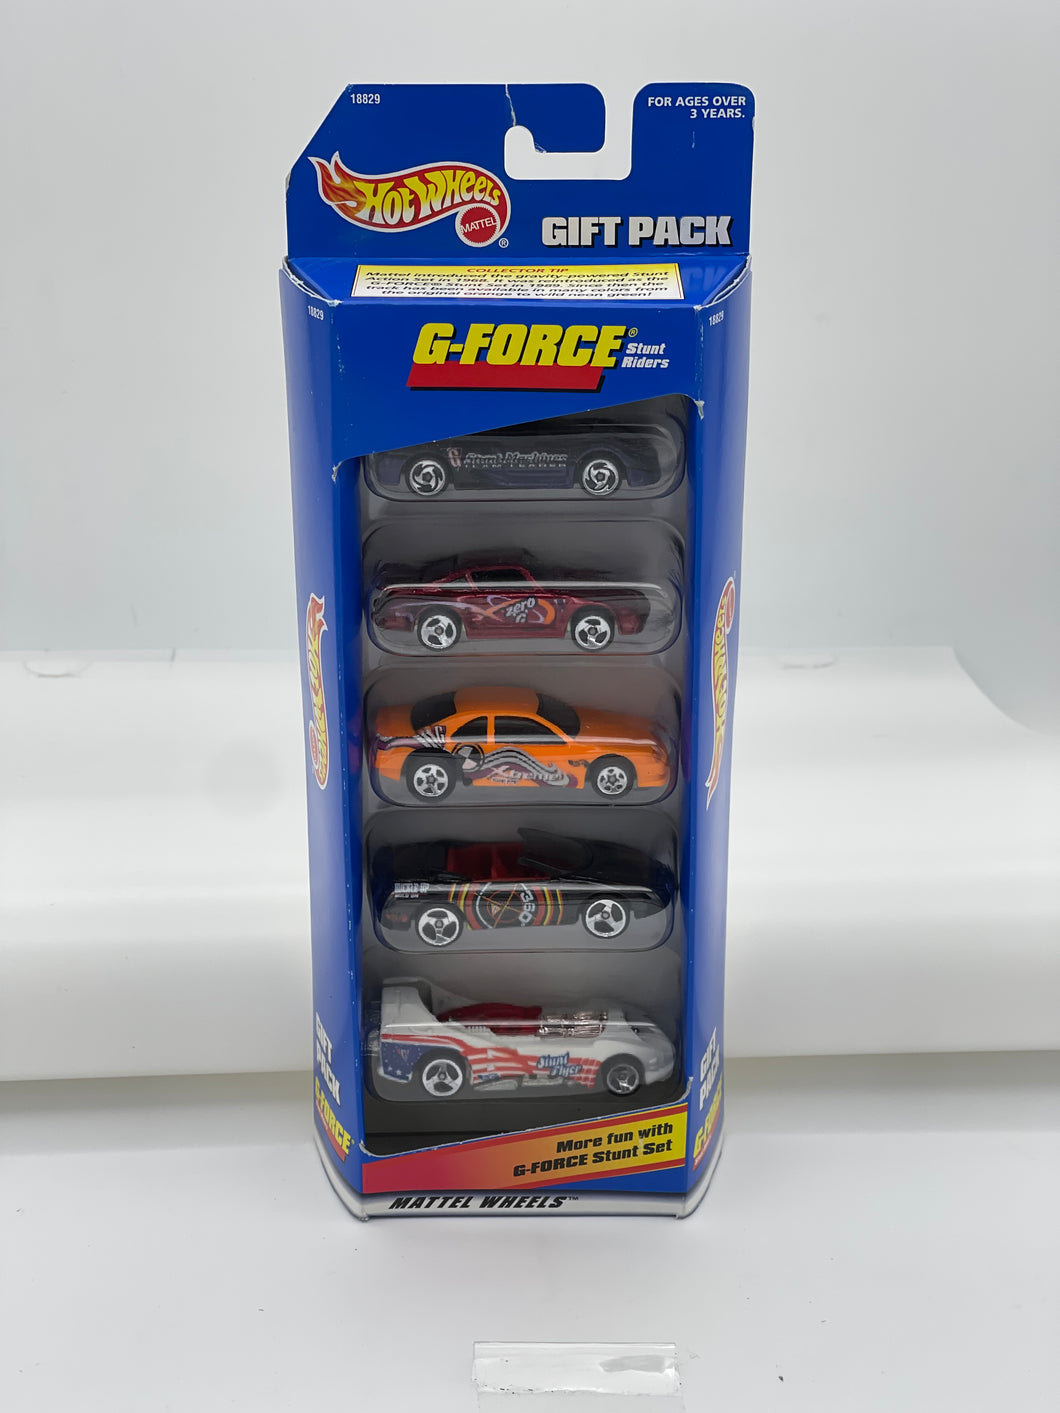 Hot Wheels G-Force (Gift Pack)